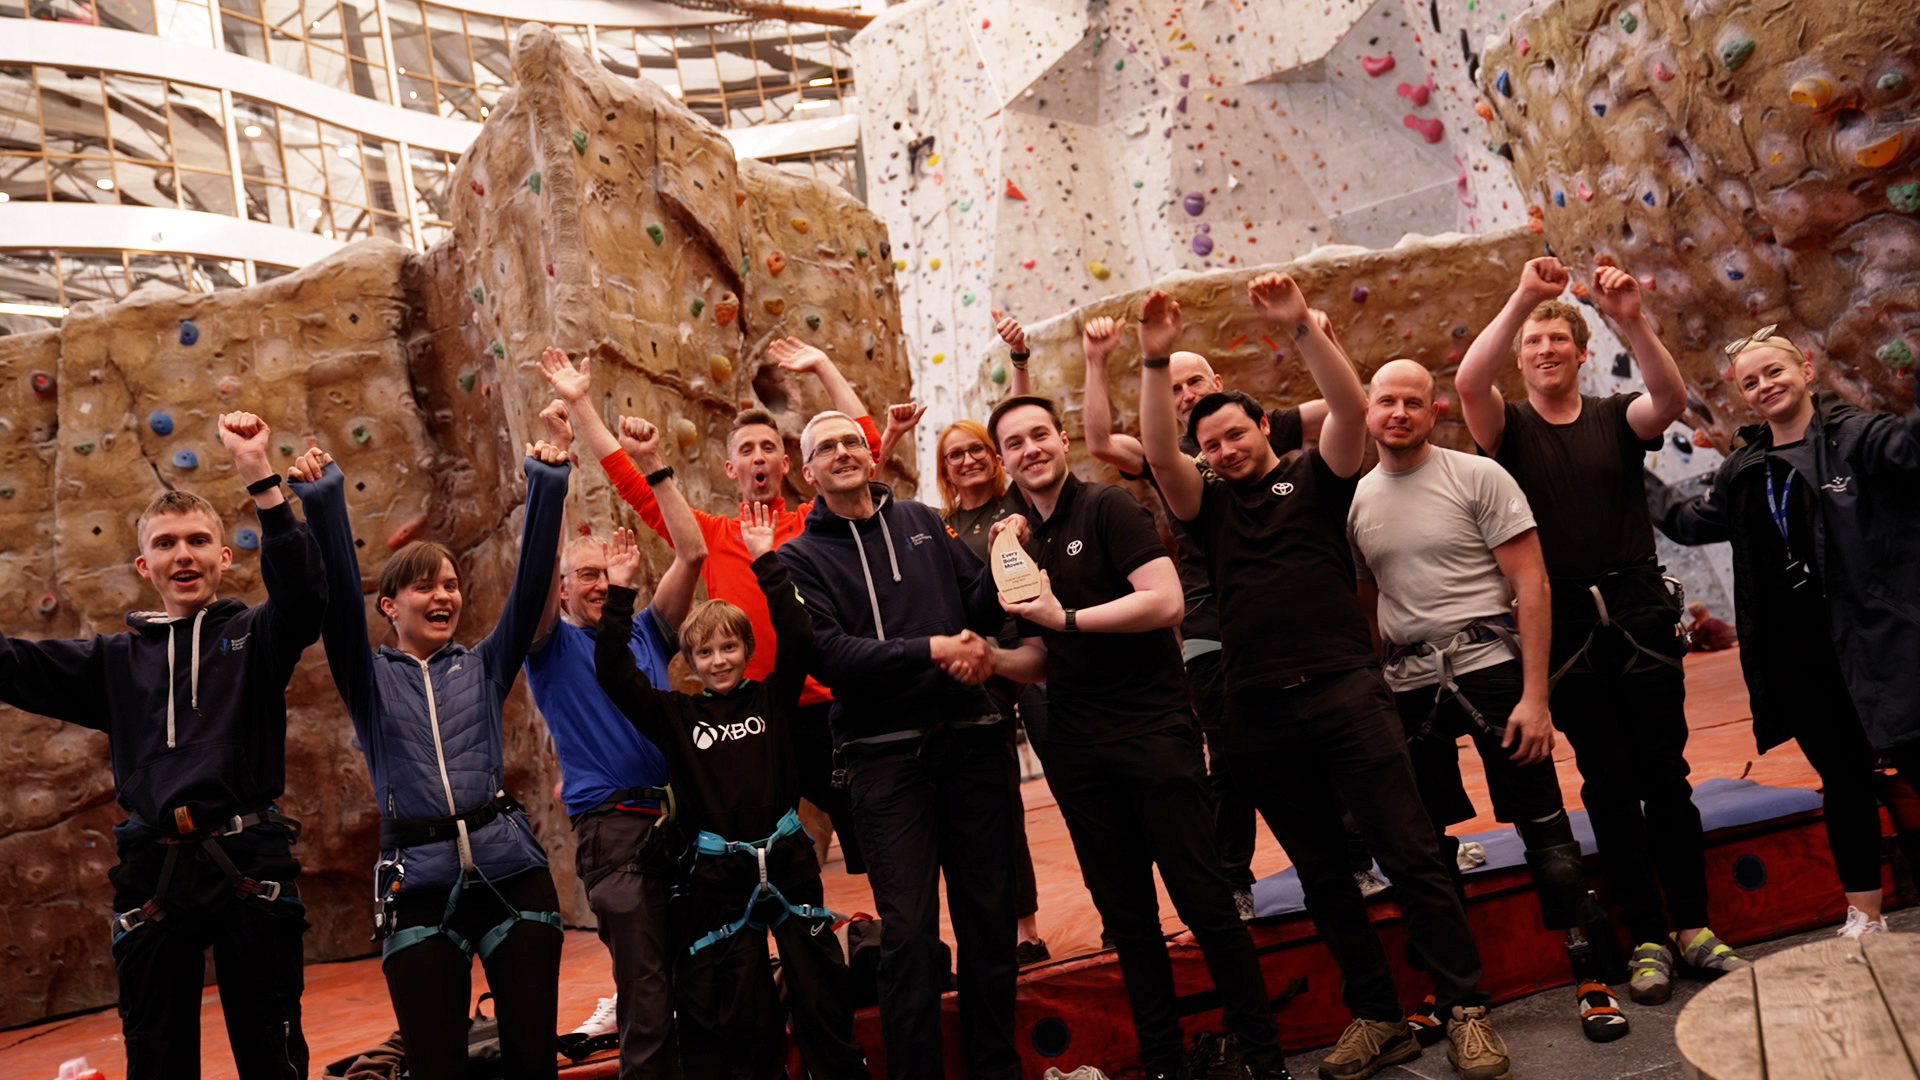 Scottish Paraclimbing Club accepting their Every Body Moves Club of the Month award